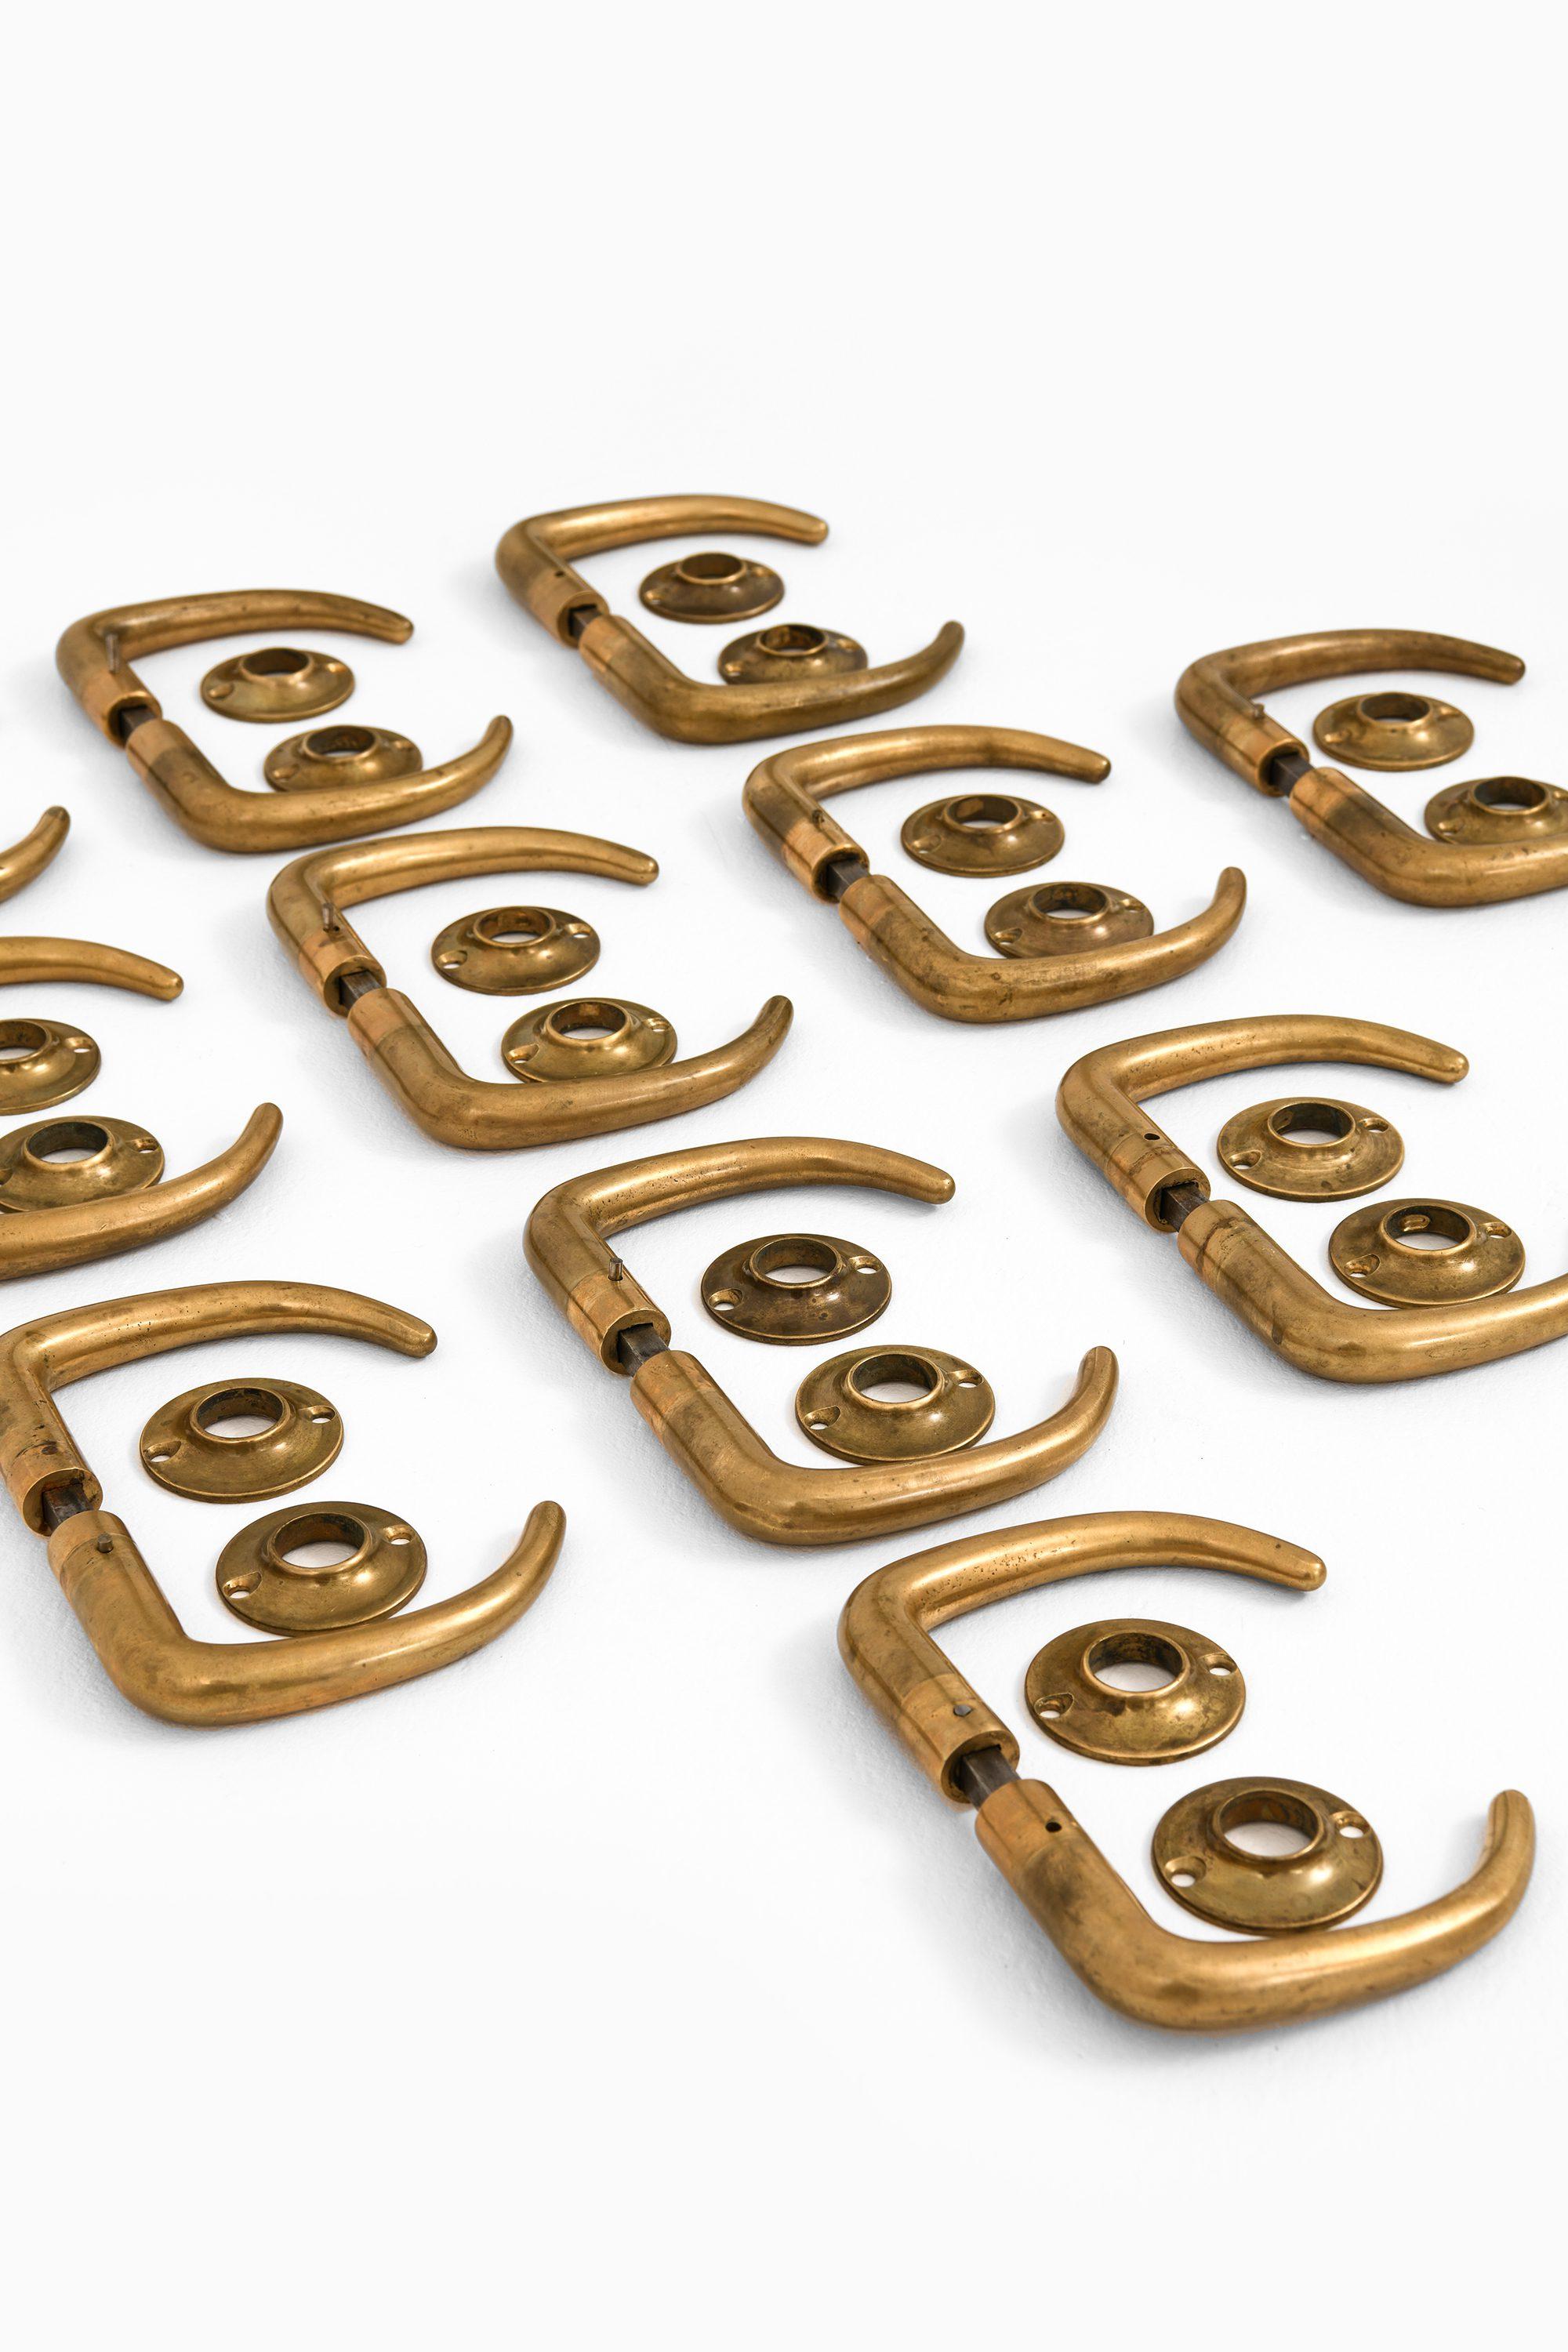 Rare Set of 11 Doorhandles in Brass, 1950’s

Additional Information:
Material: Brass
Style: Mid century, Scandinavian
Produced in Denmark
Dimensions (W): 11 cm
Condition: Good vintage condition, with signs of usage